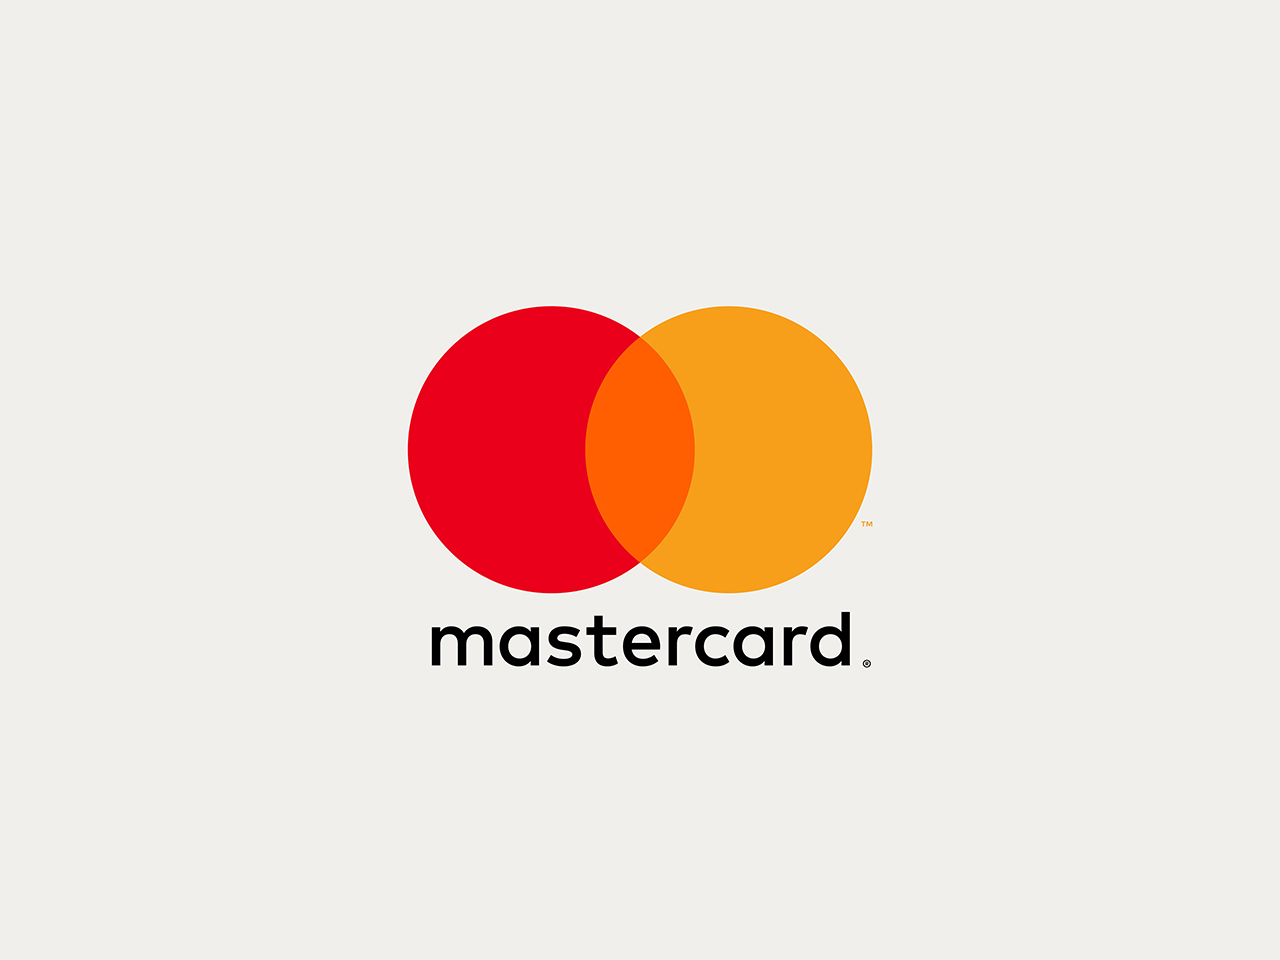 Mastercard unveiled a new logo first time in two decades